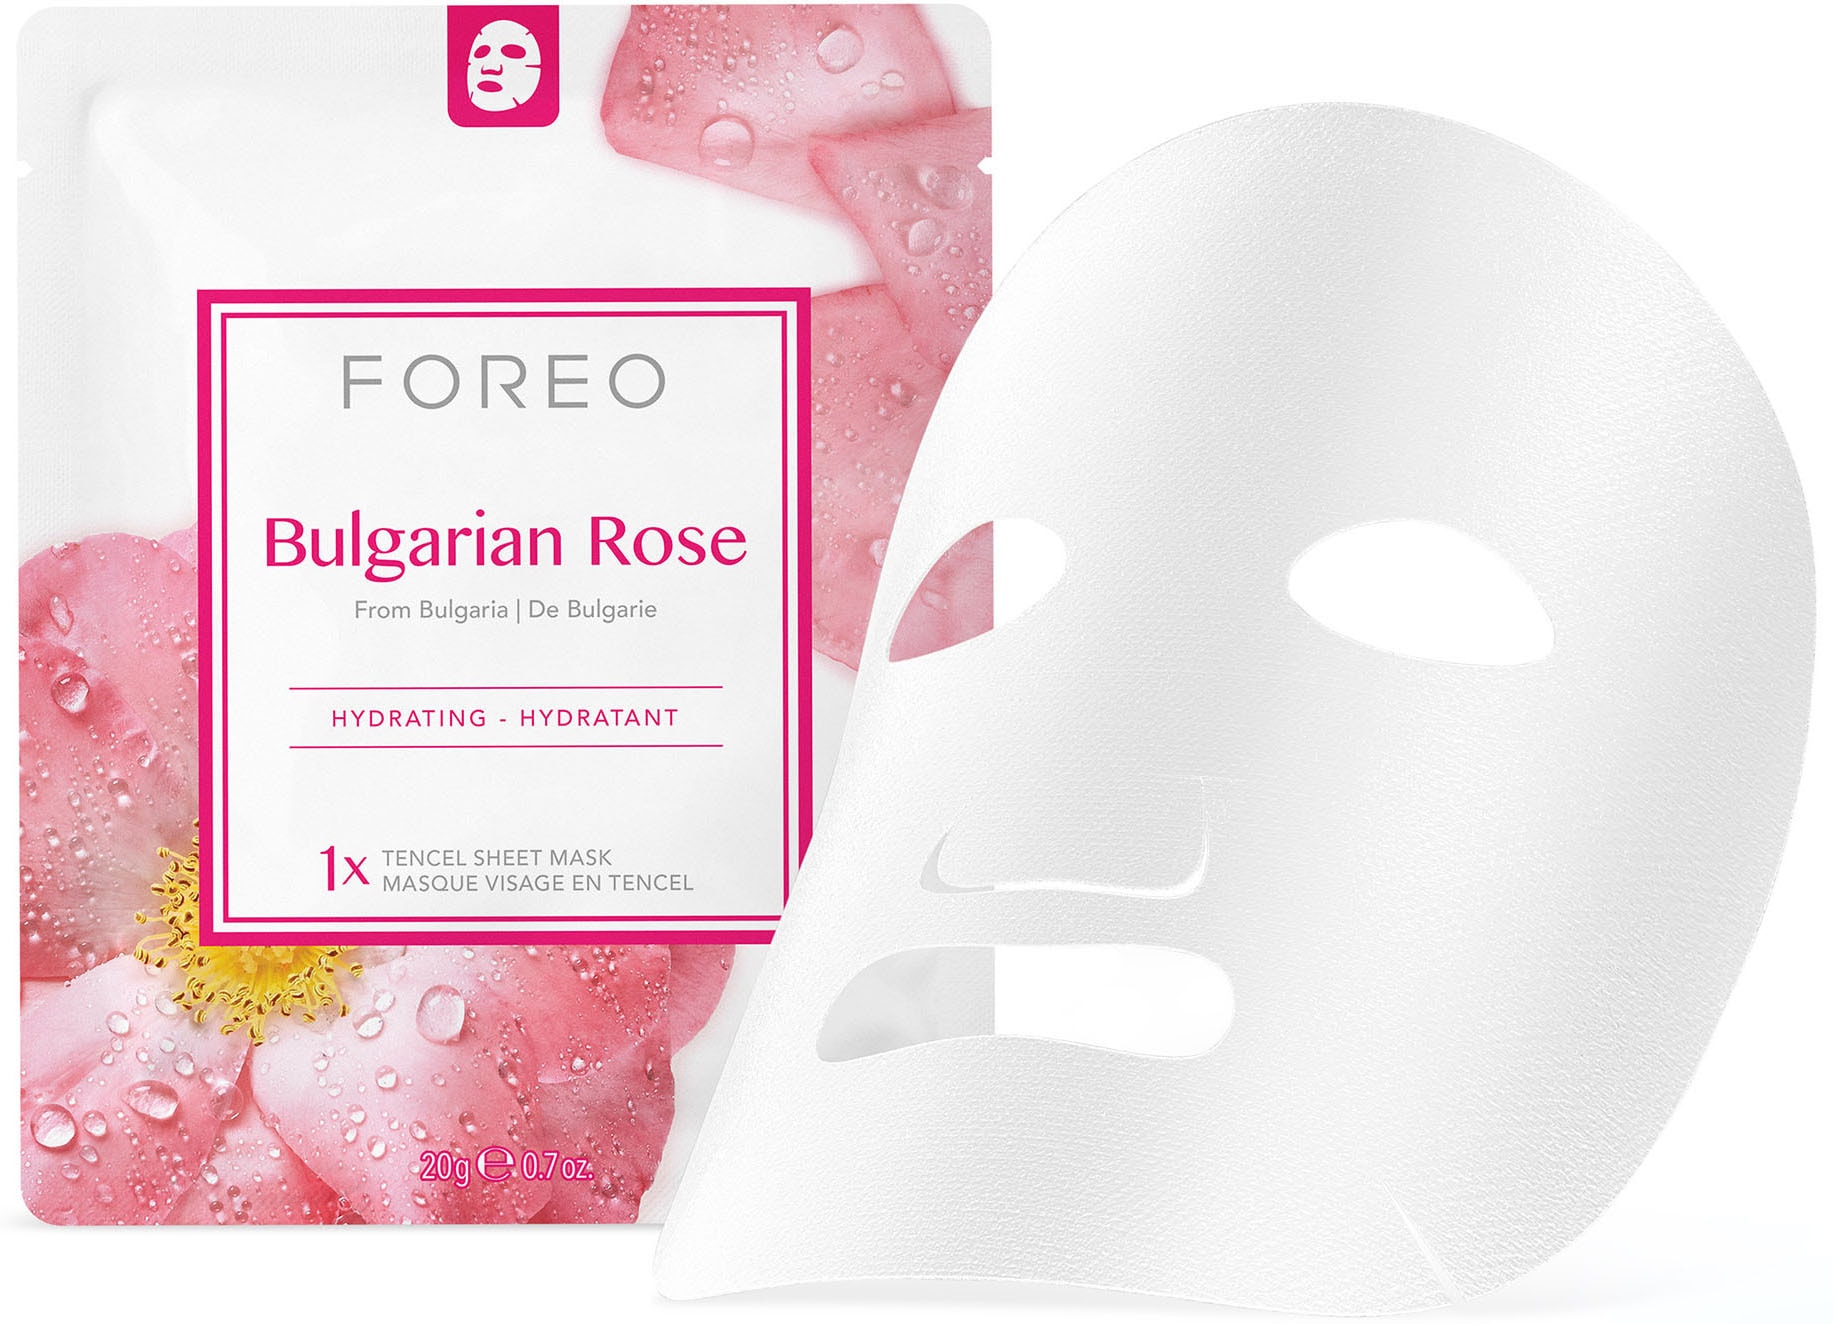 Collection OTTO Face »Farm tlg.) Bulgarian Rose«, To Masks online Sheet FOREO bei Gesichtsmaske (3